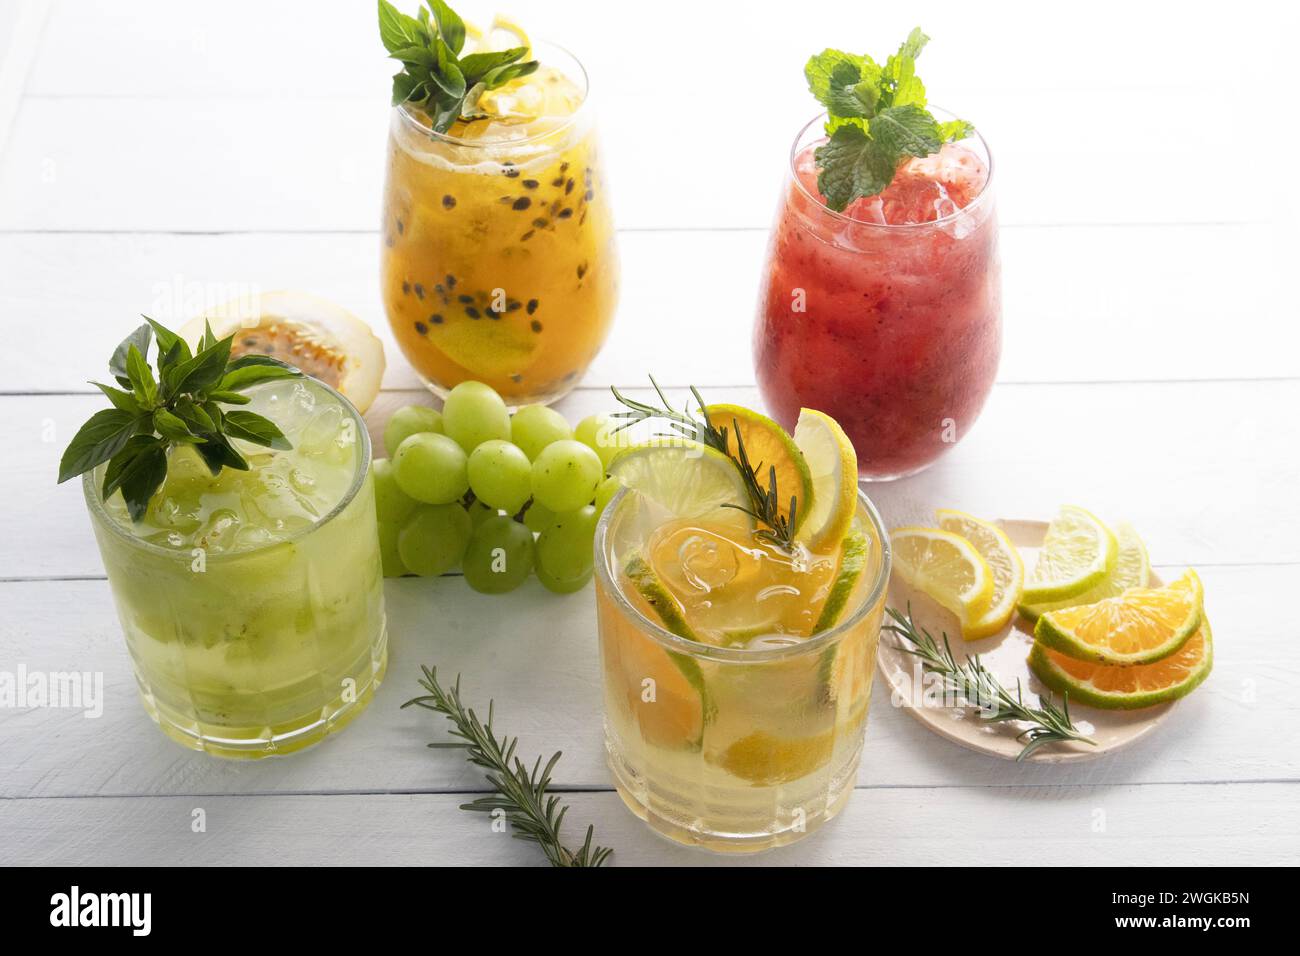 A glass of caipirinha, a typical alcoholic drink from Brazil, made with cachaca or vodka, fruits, ice and sugar Stock Photo